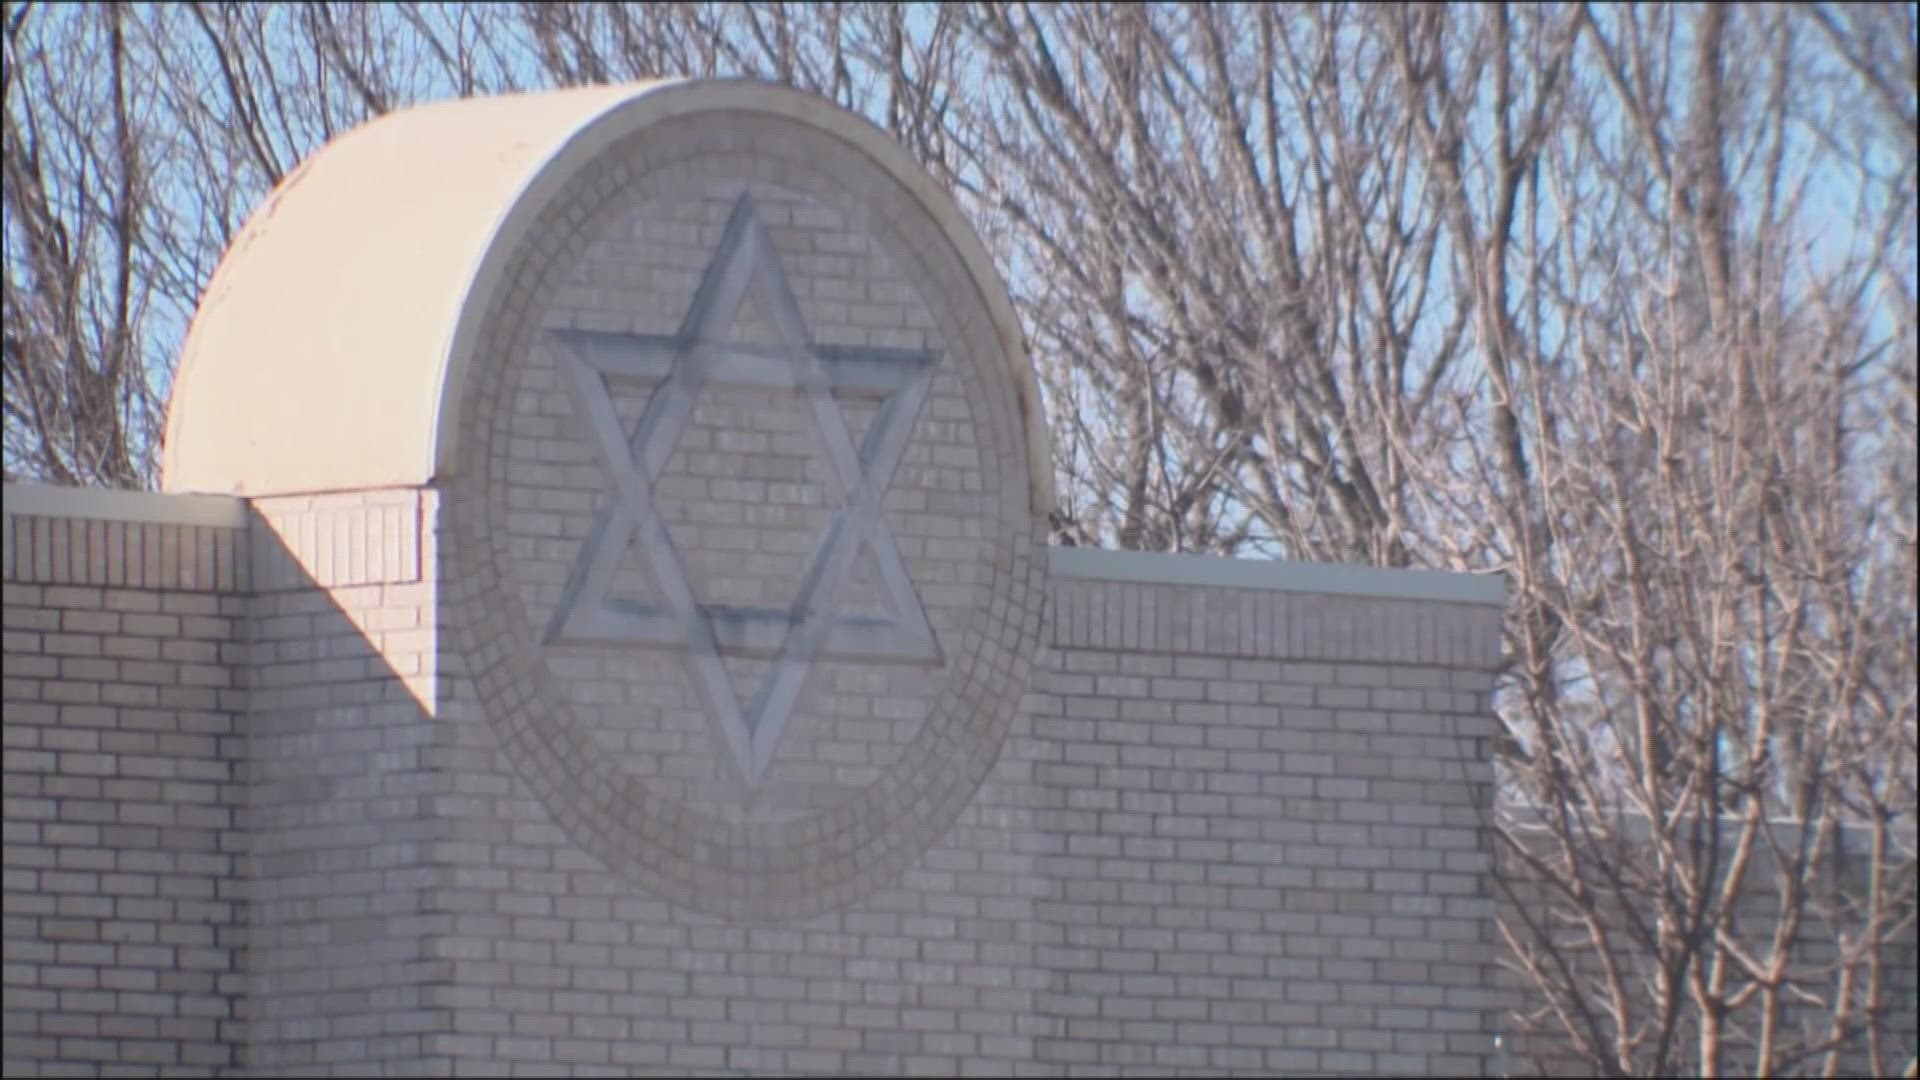 One of those communities is in Colleyville, where the Jewish community is still trying to heal from the recent synagogue hostage incident.